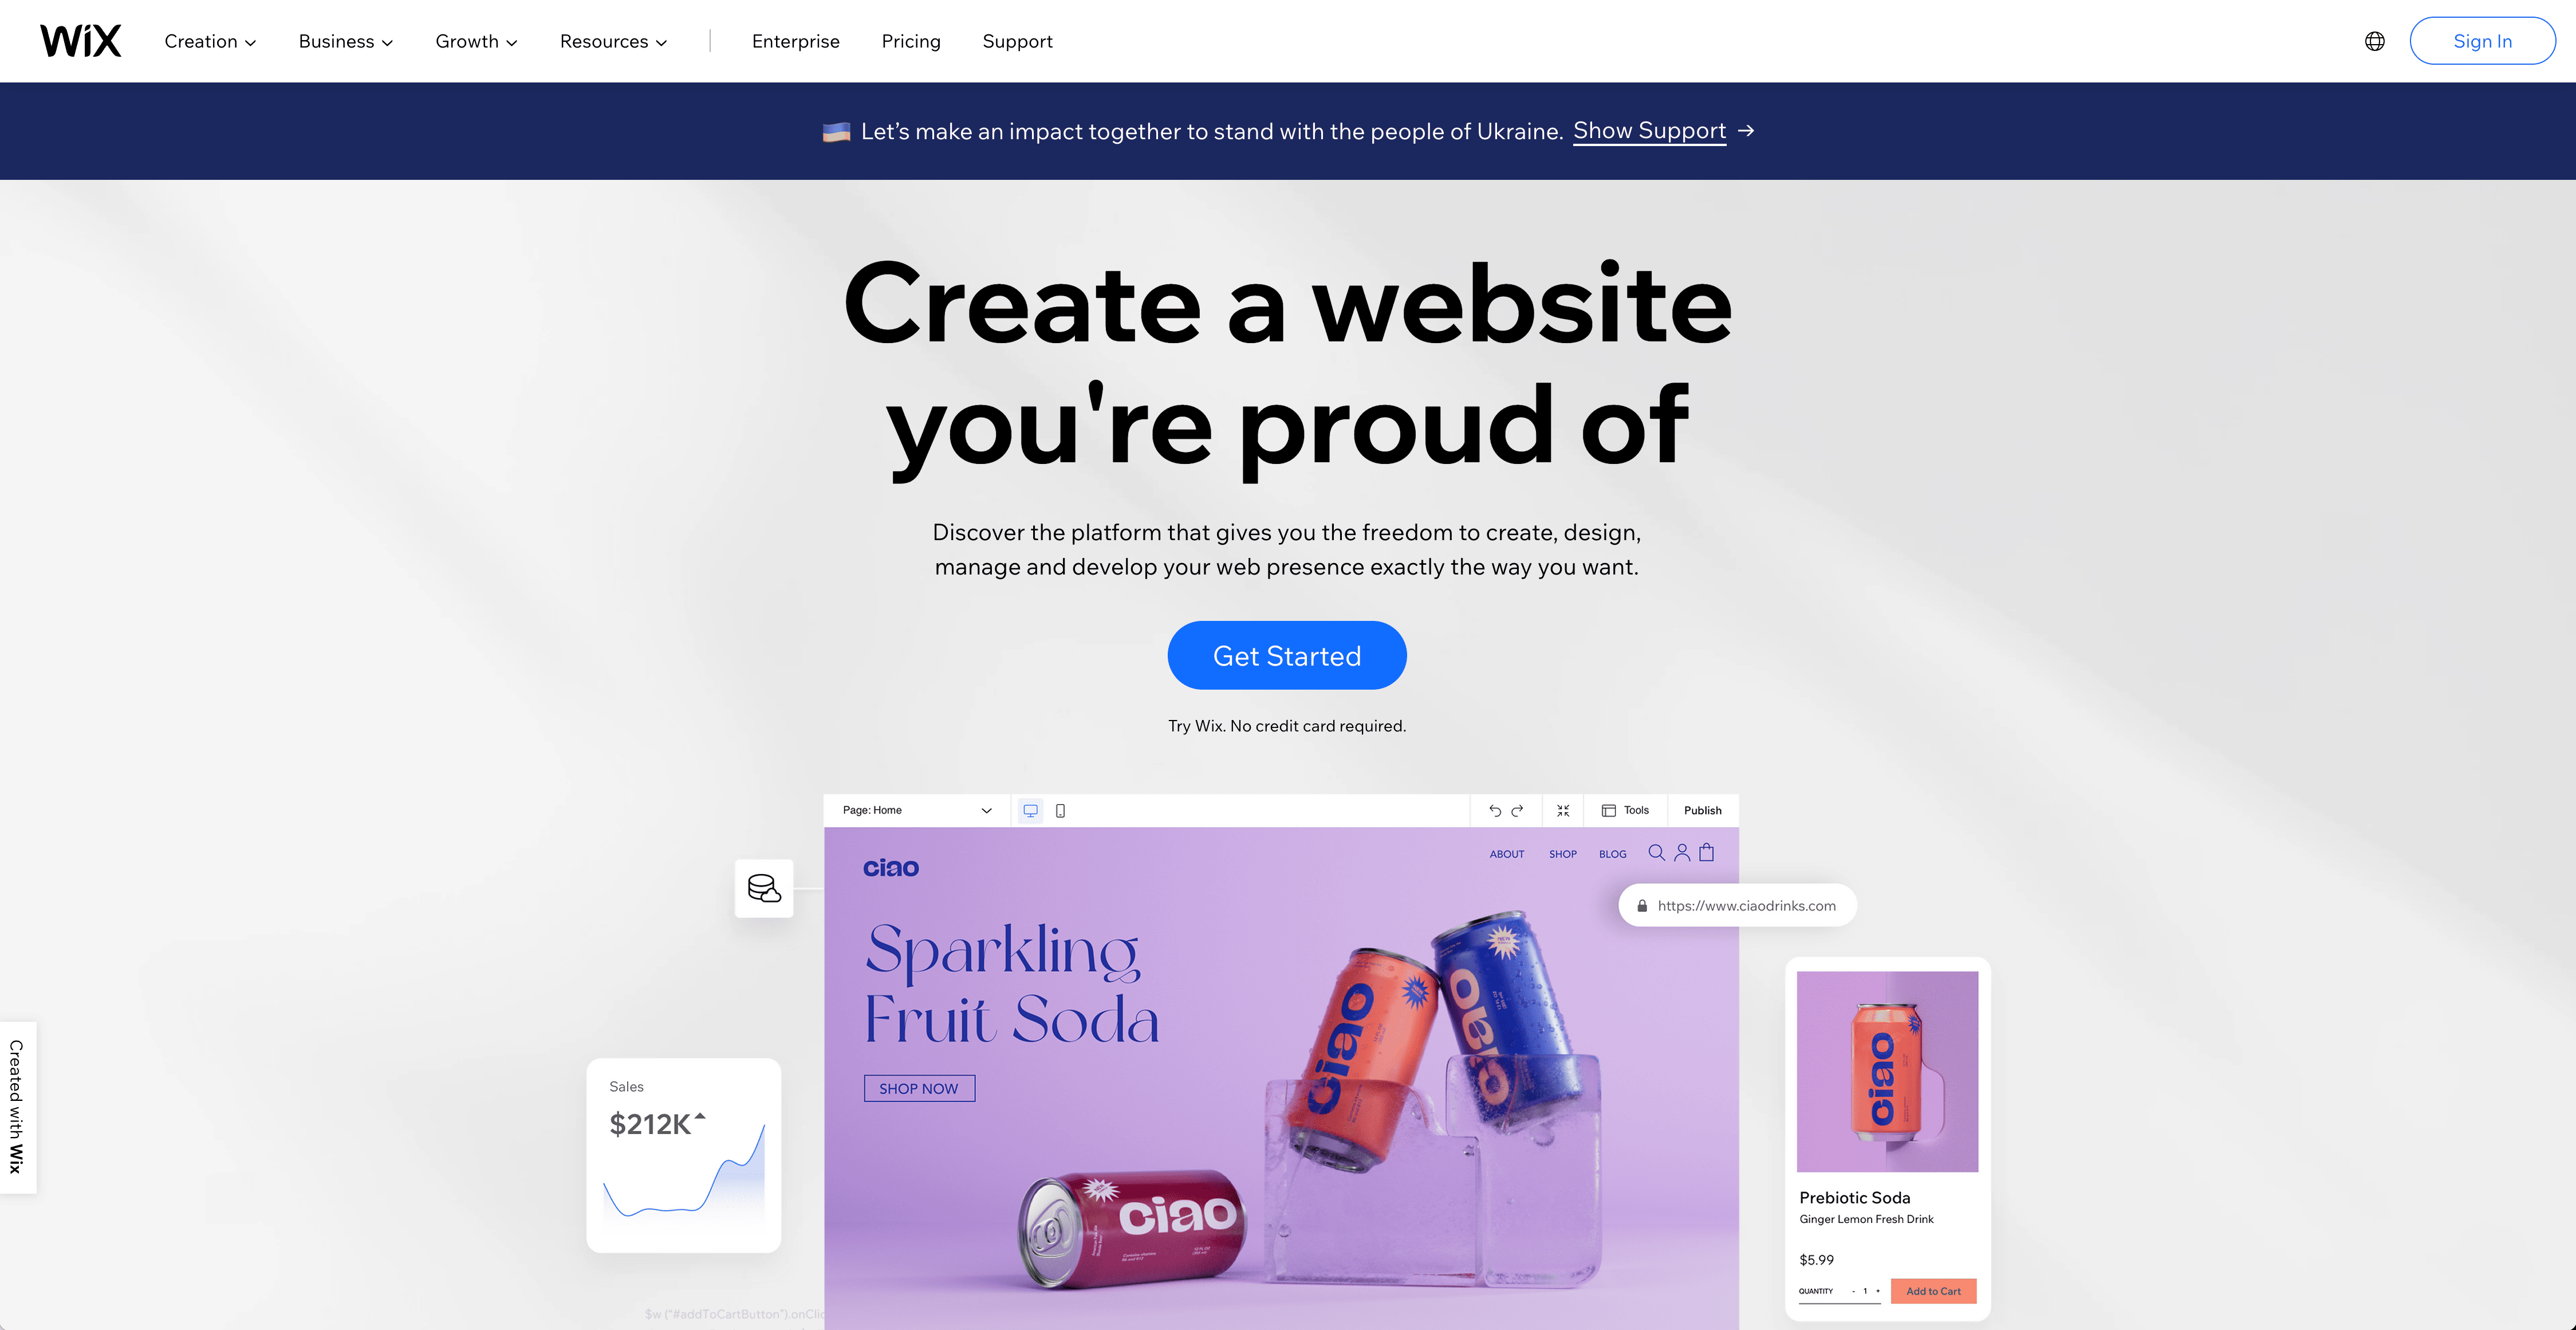 Wix home page, with their Get Started button to create a Wix account